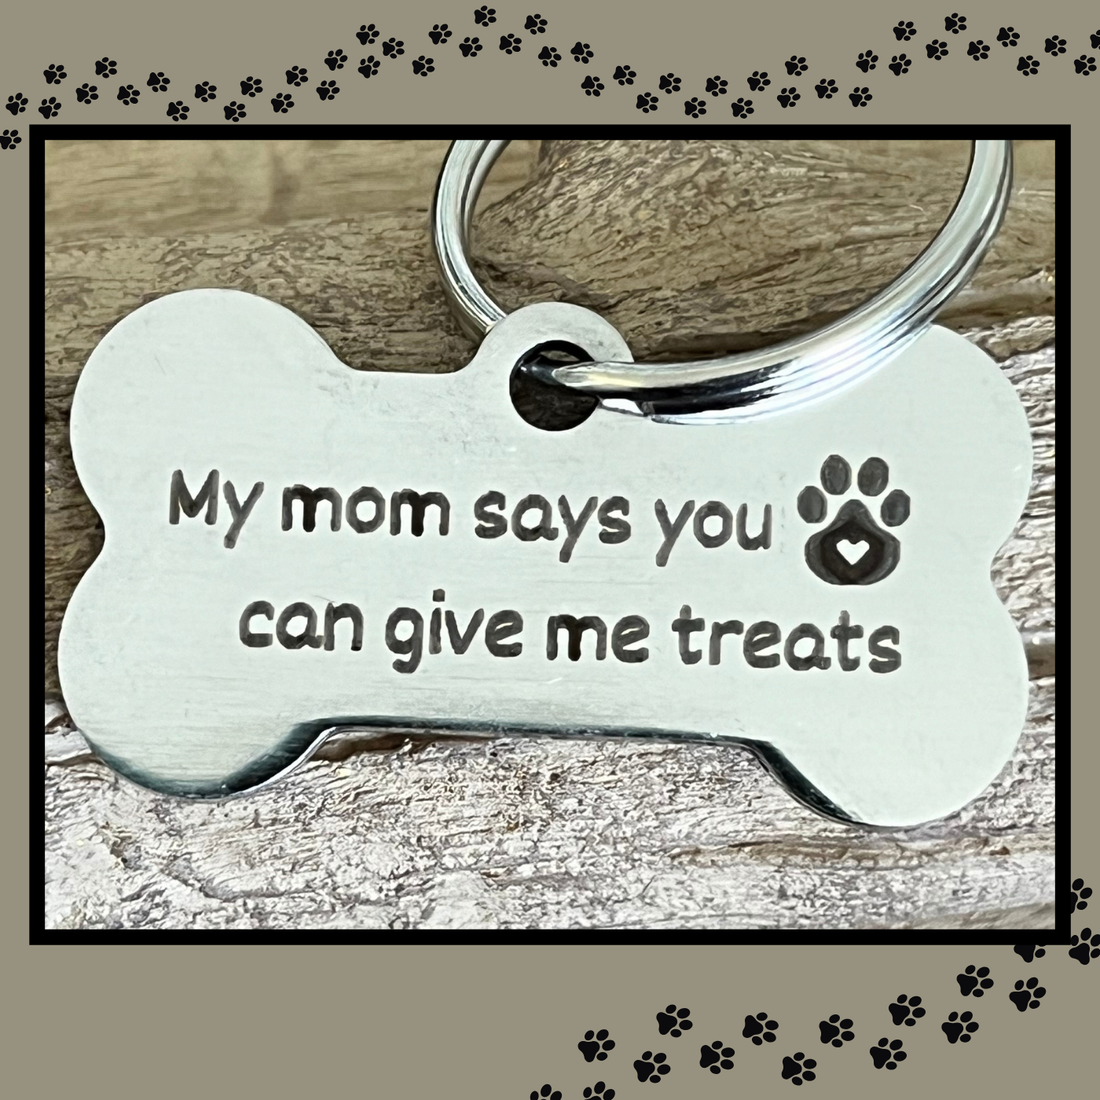 Adorable pet tag with deep engraving. Perfect for adding a cute, practical accessory.